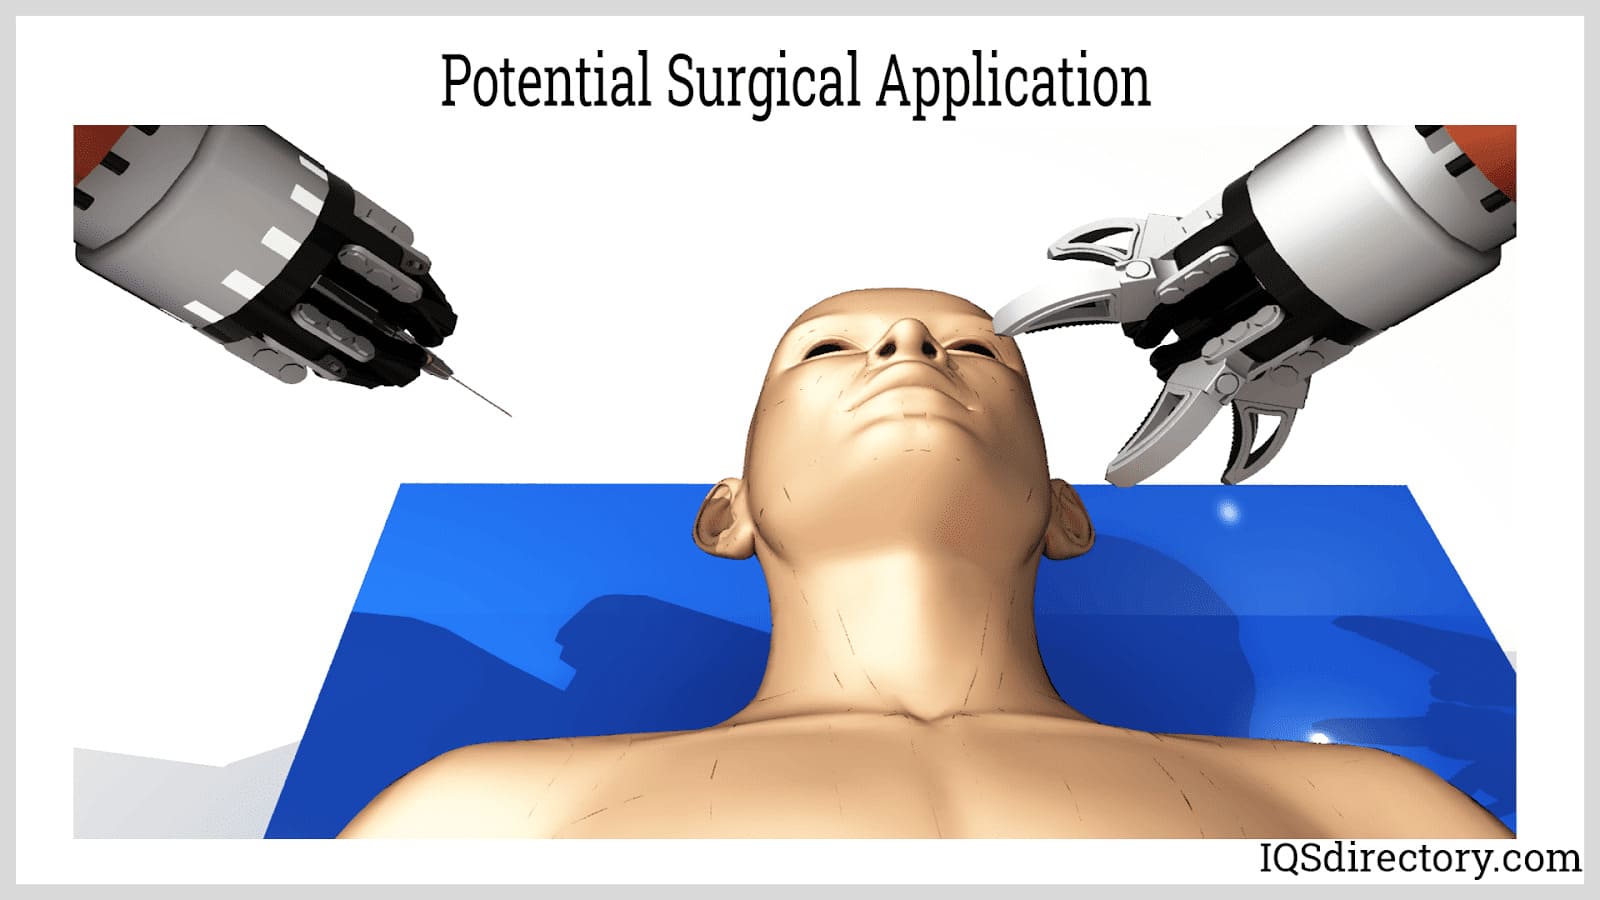 Potential Surgical Application